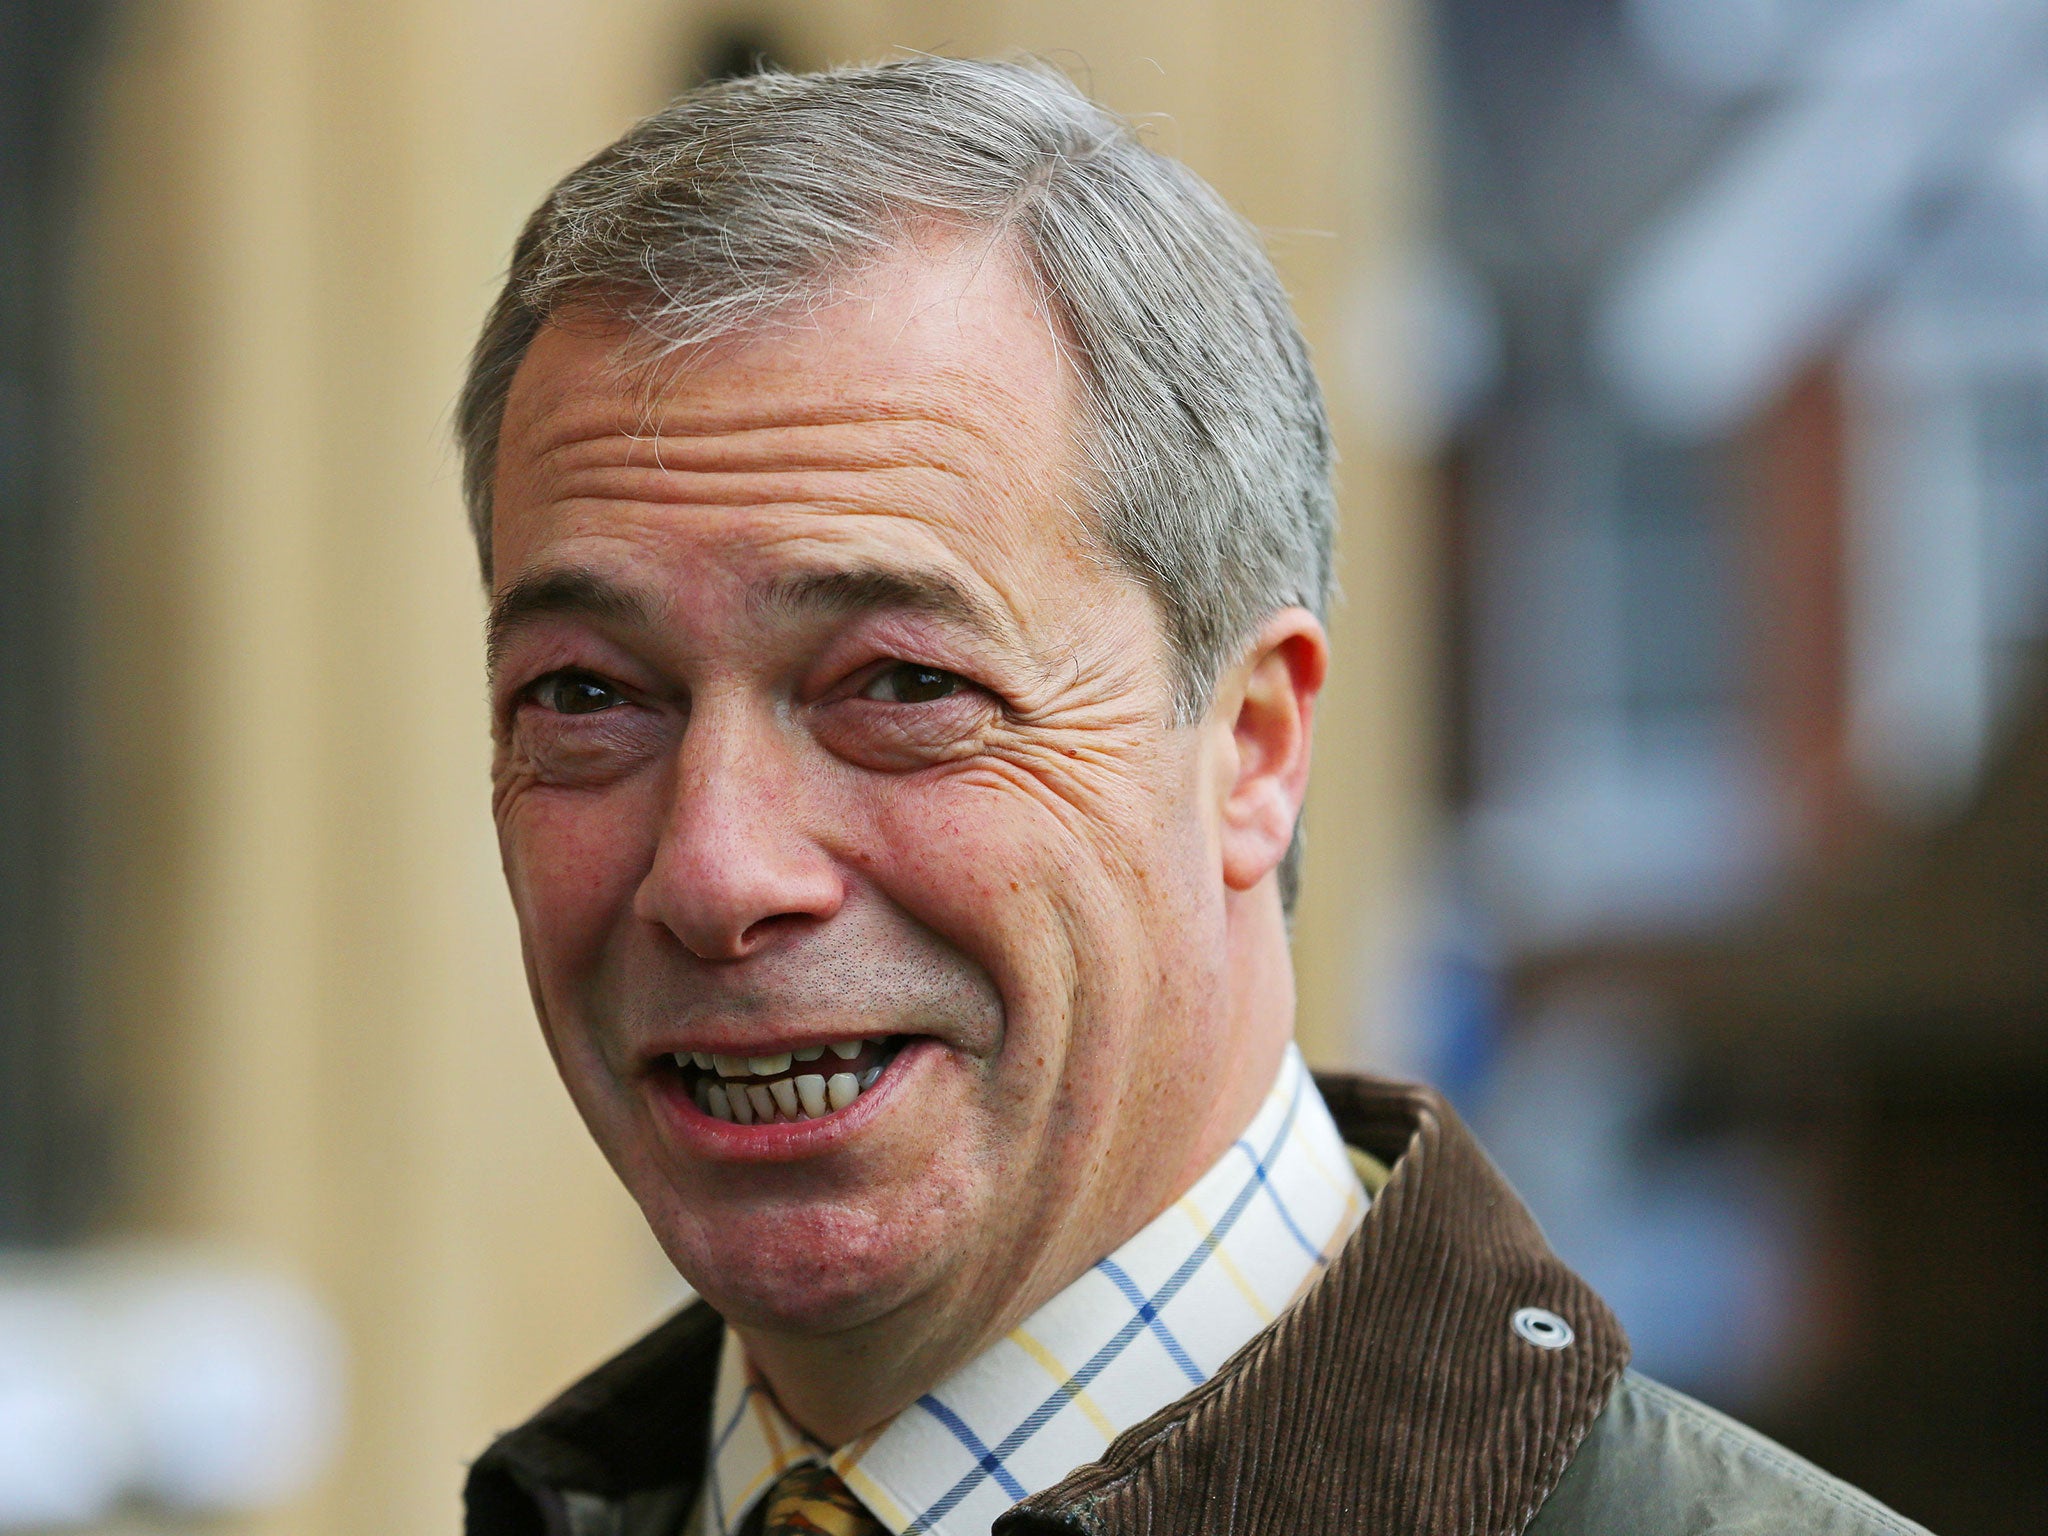 Nigel Farage will quit as Ukip leader if he fails to win a Parliamentary seat at the general election in May